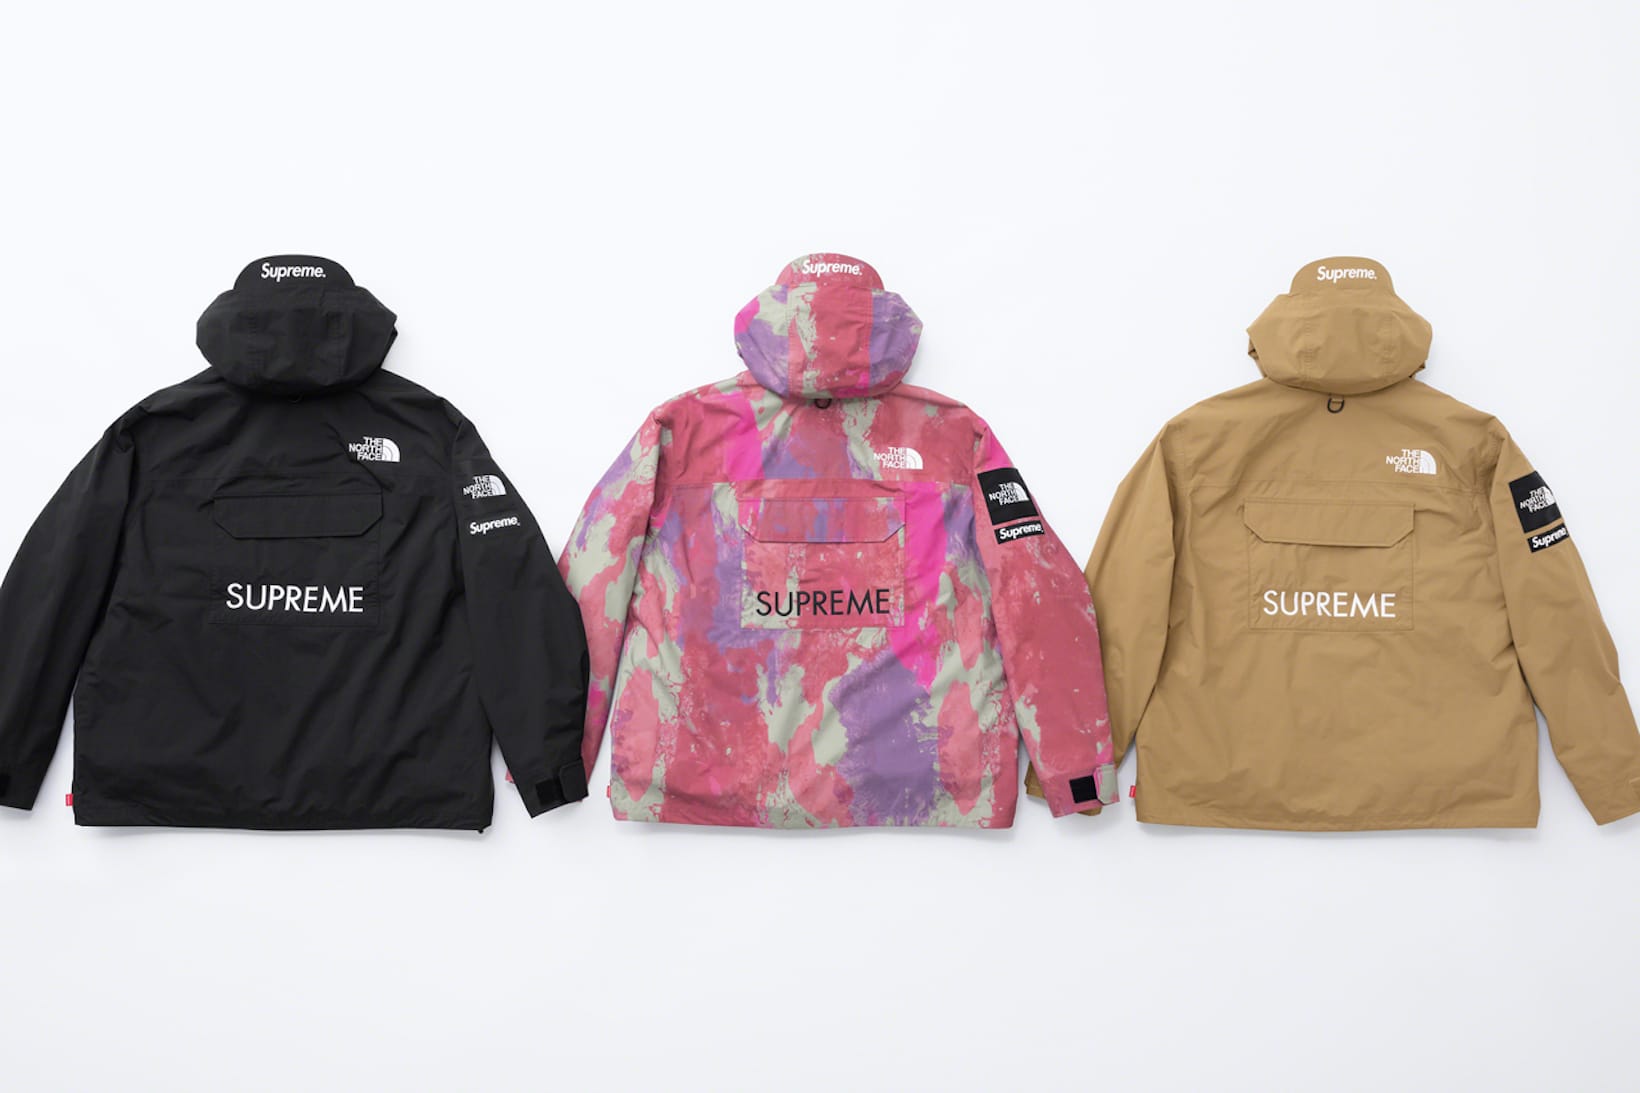 The North Face x Supreme Spring 2020 